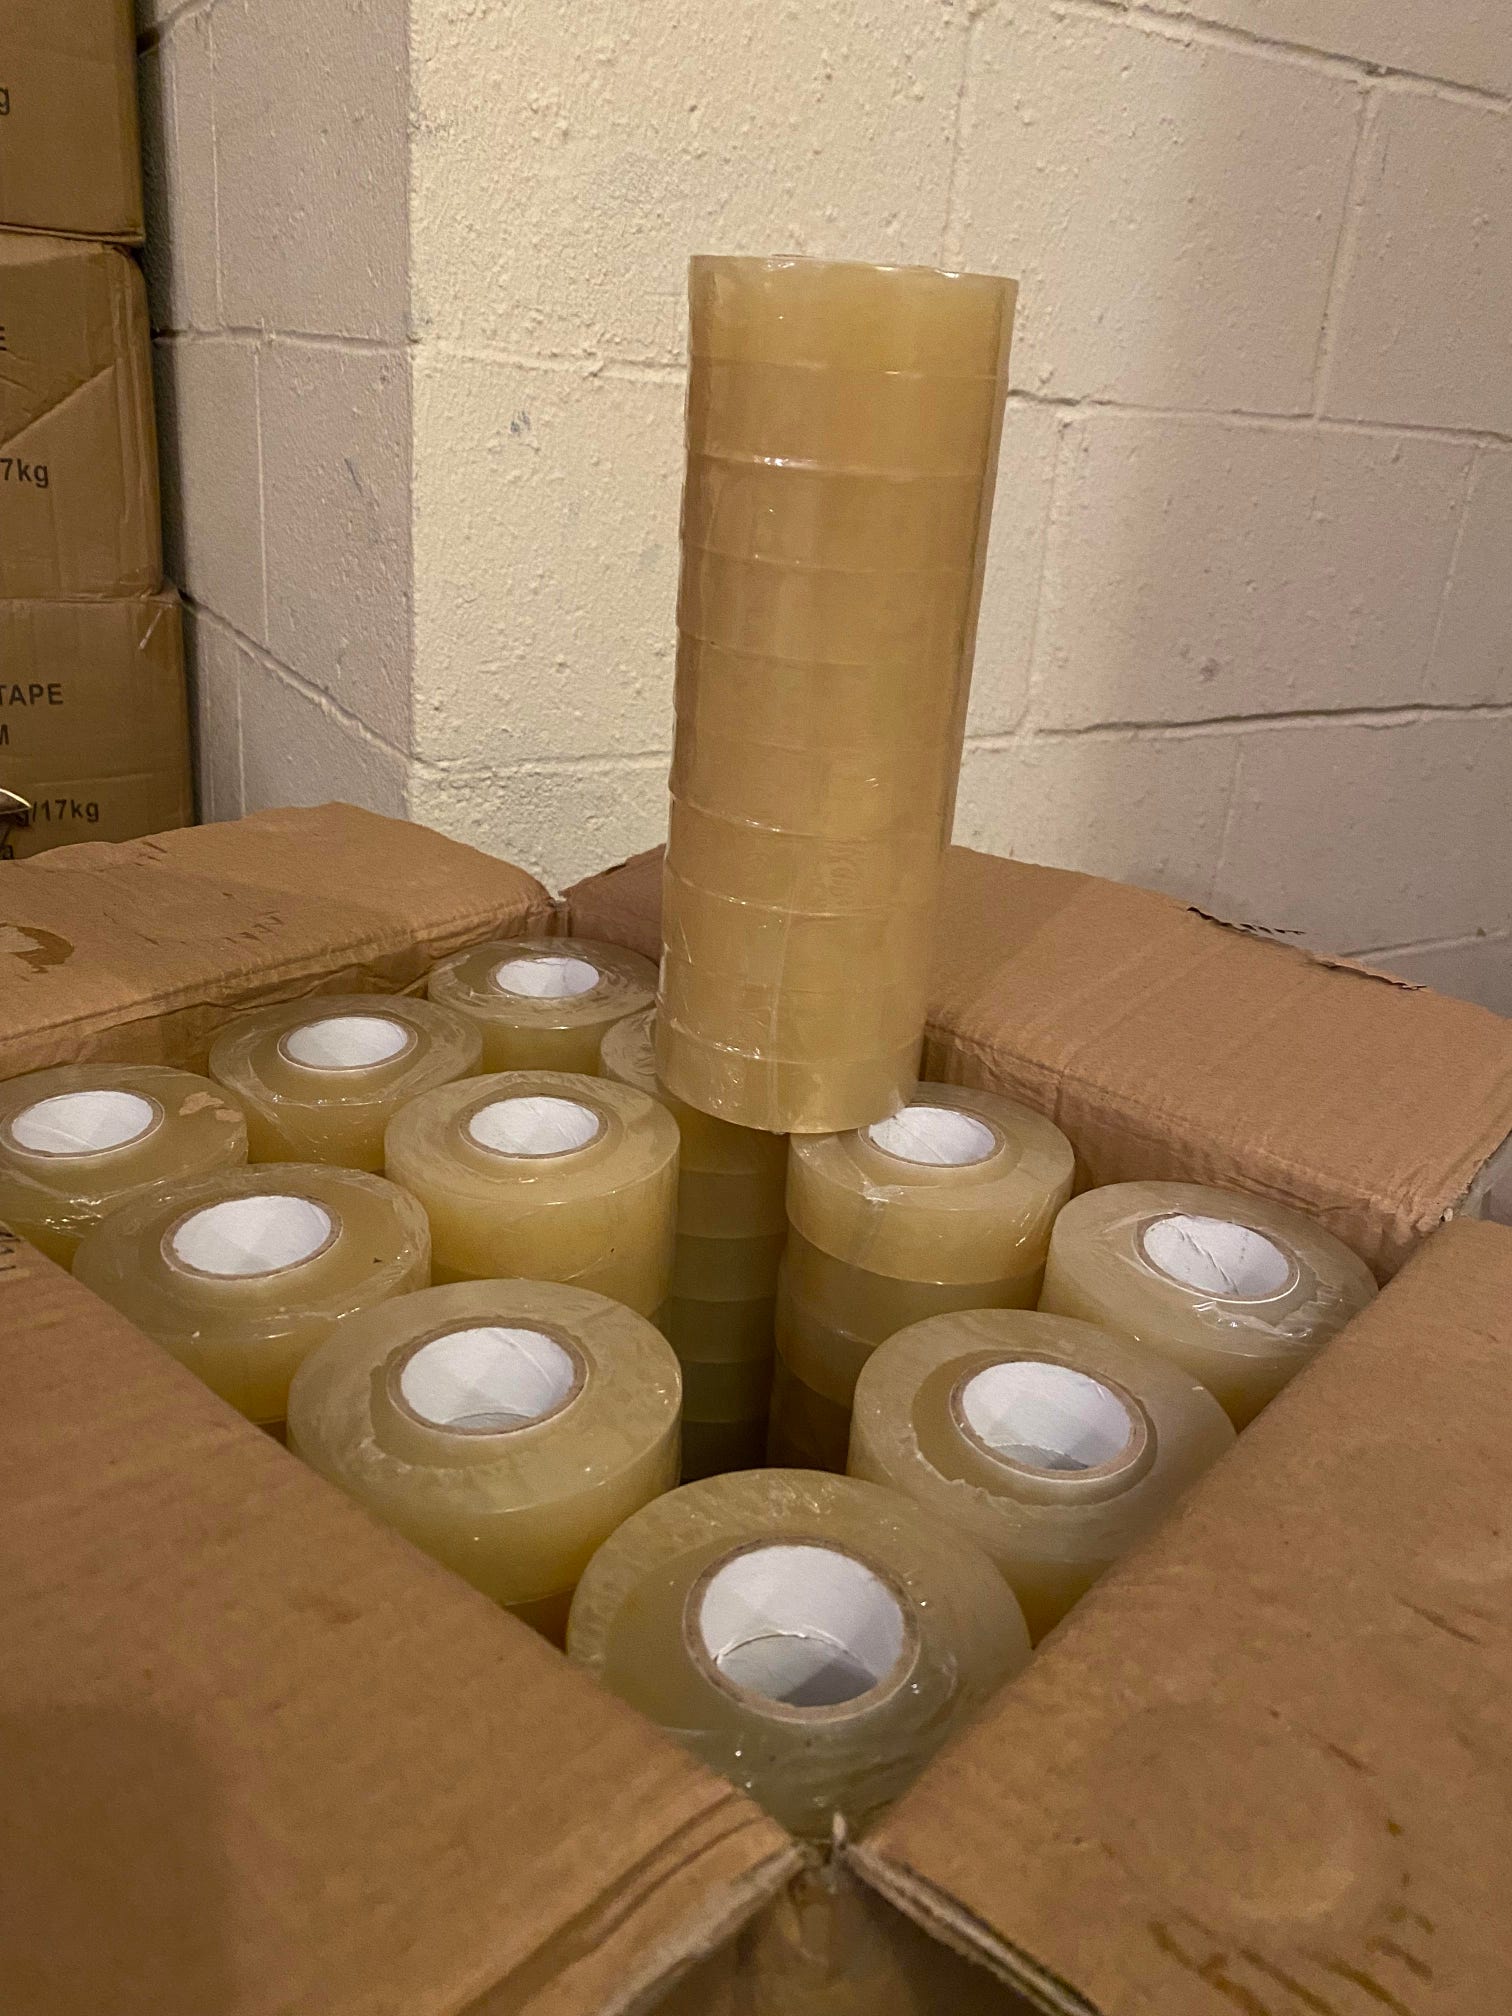 Bulk Clear Tape - 120 Rolls 1 inch ~ 30 Yards (25 meters) - $1.25/roll plus shipping.